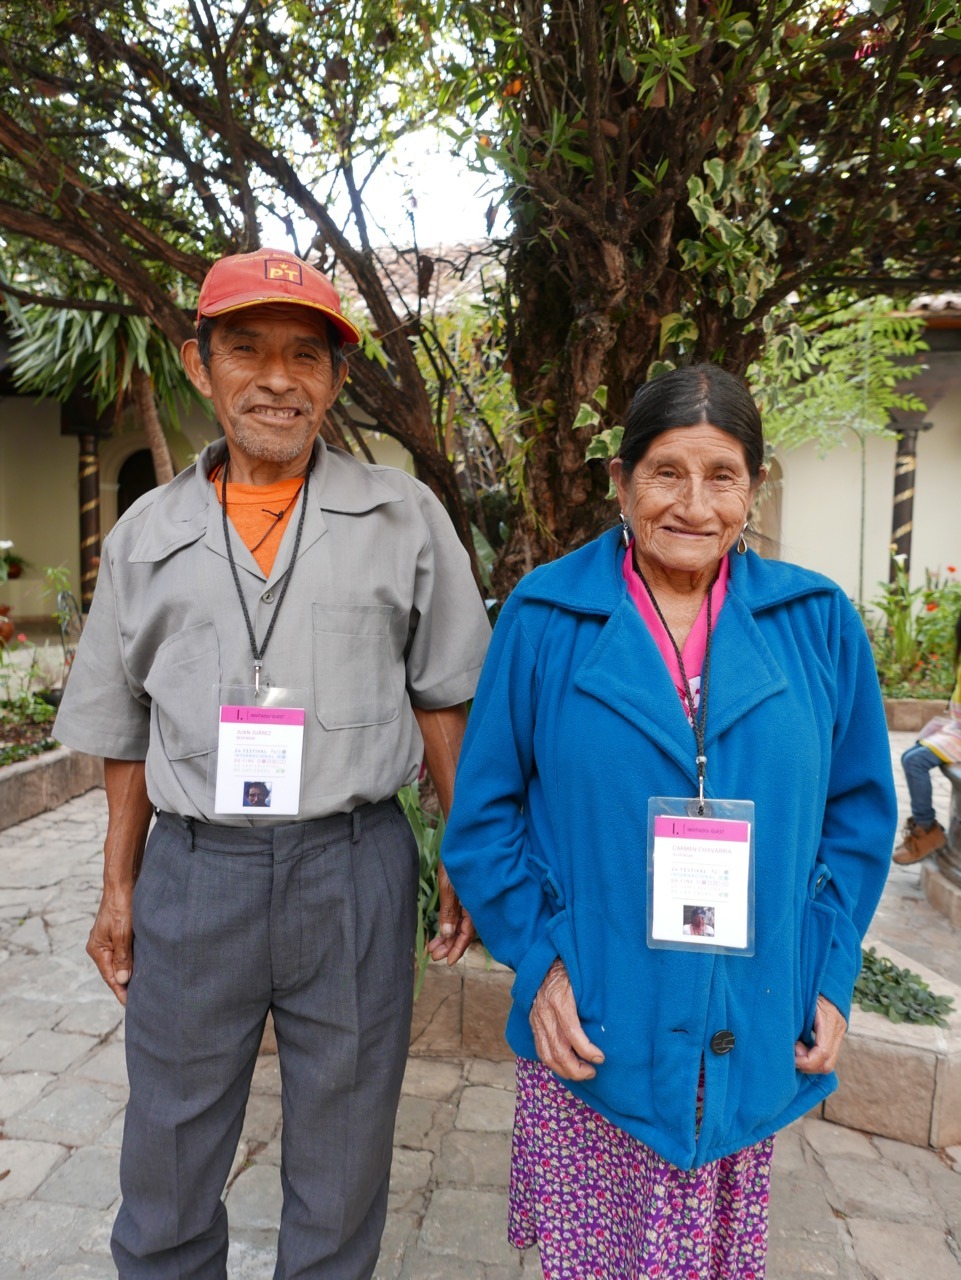 In December we got to share La Selva Negra / The Modern Jungle in its home state of Chiapas at FICSC - the International Film Festival of San Cristobal. The film’s protagonists Juan and Carmen were there, and the film showed to an audience of 300+...